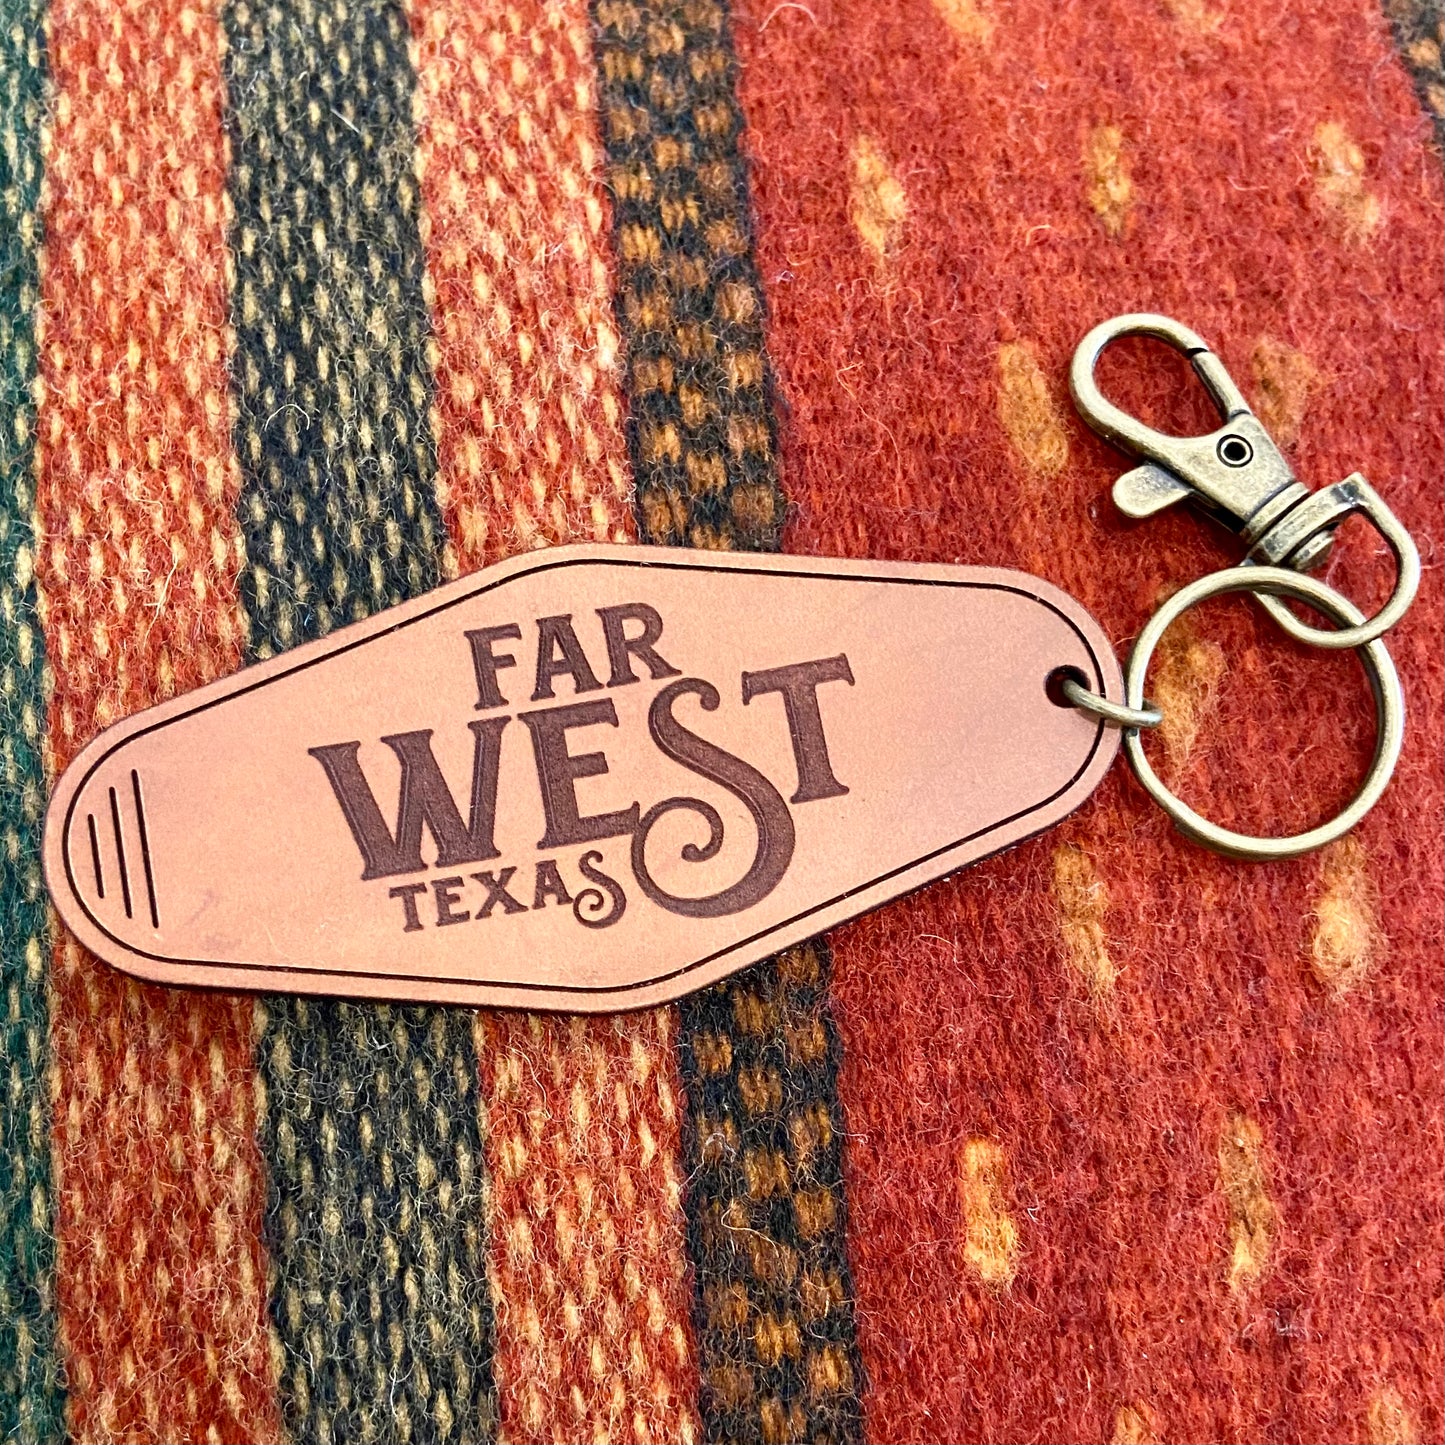 Far west Texas in 6Whiskey font on leather key chain